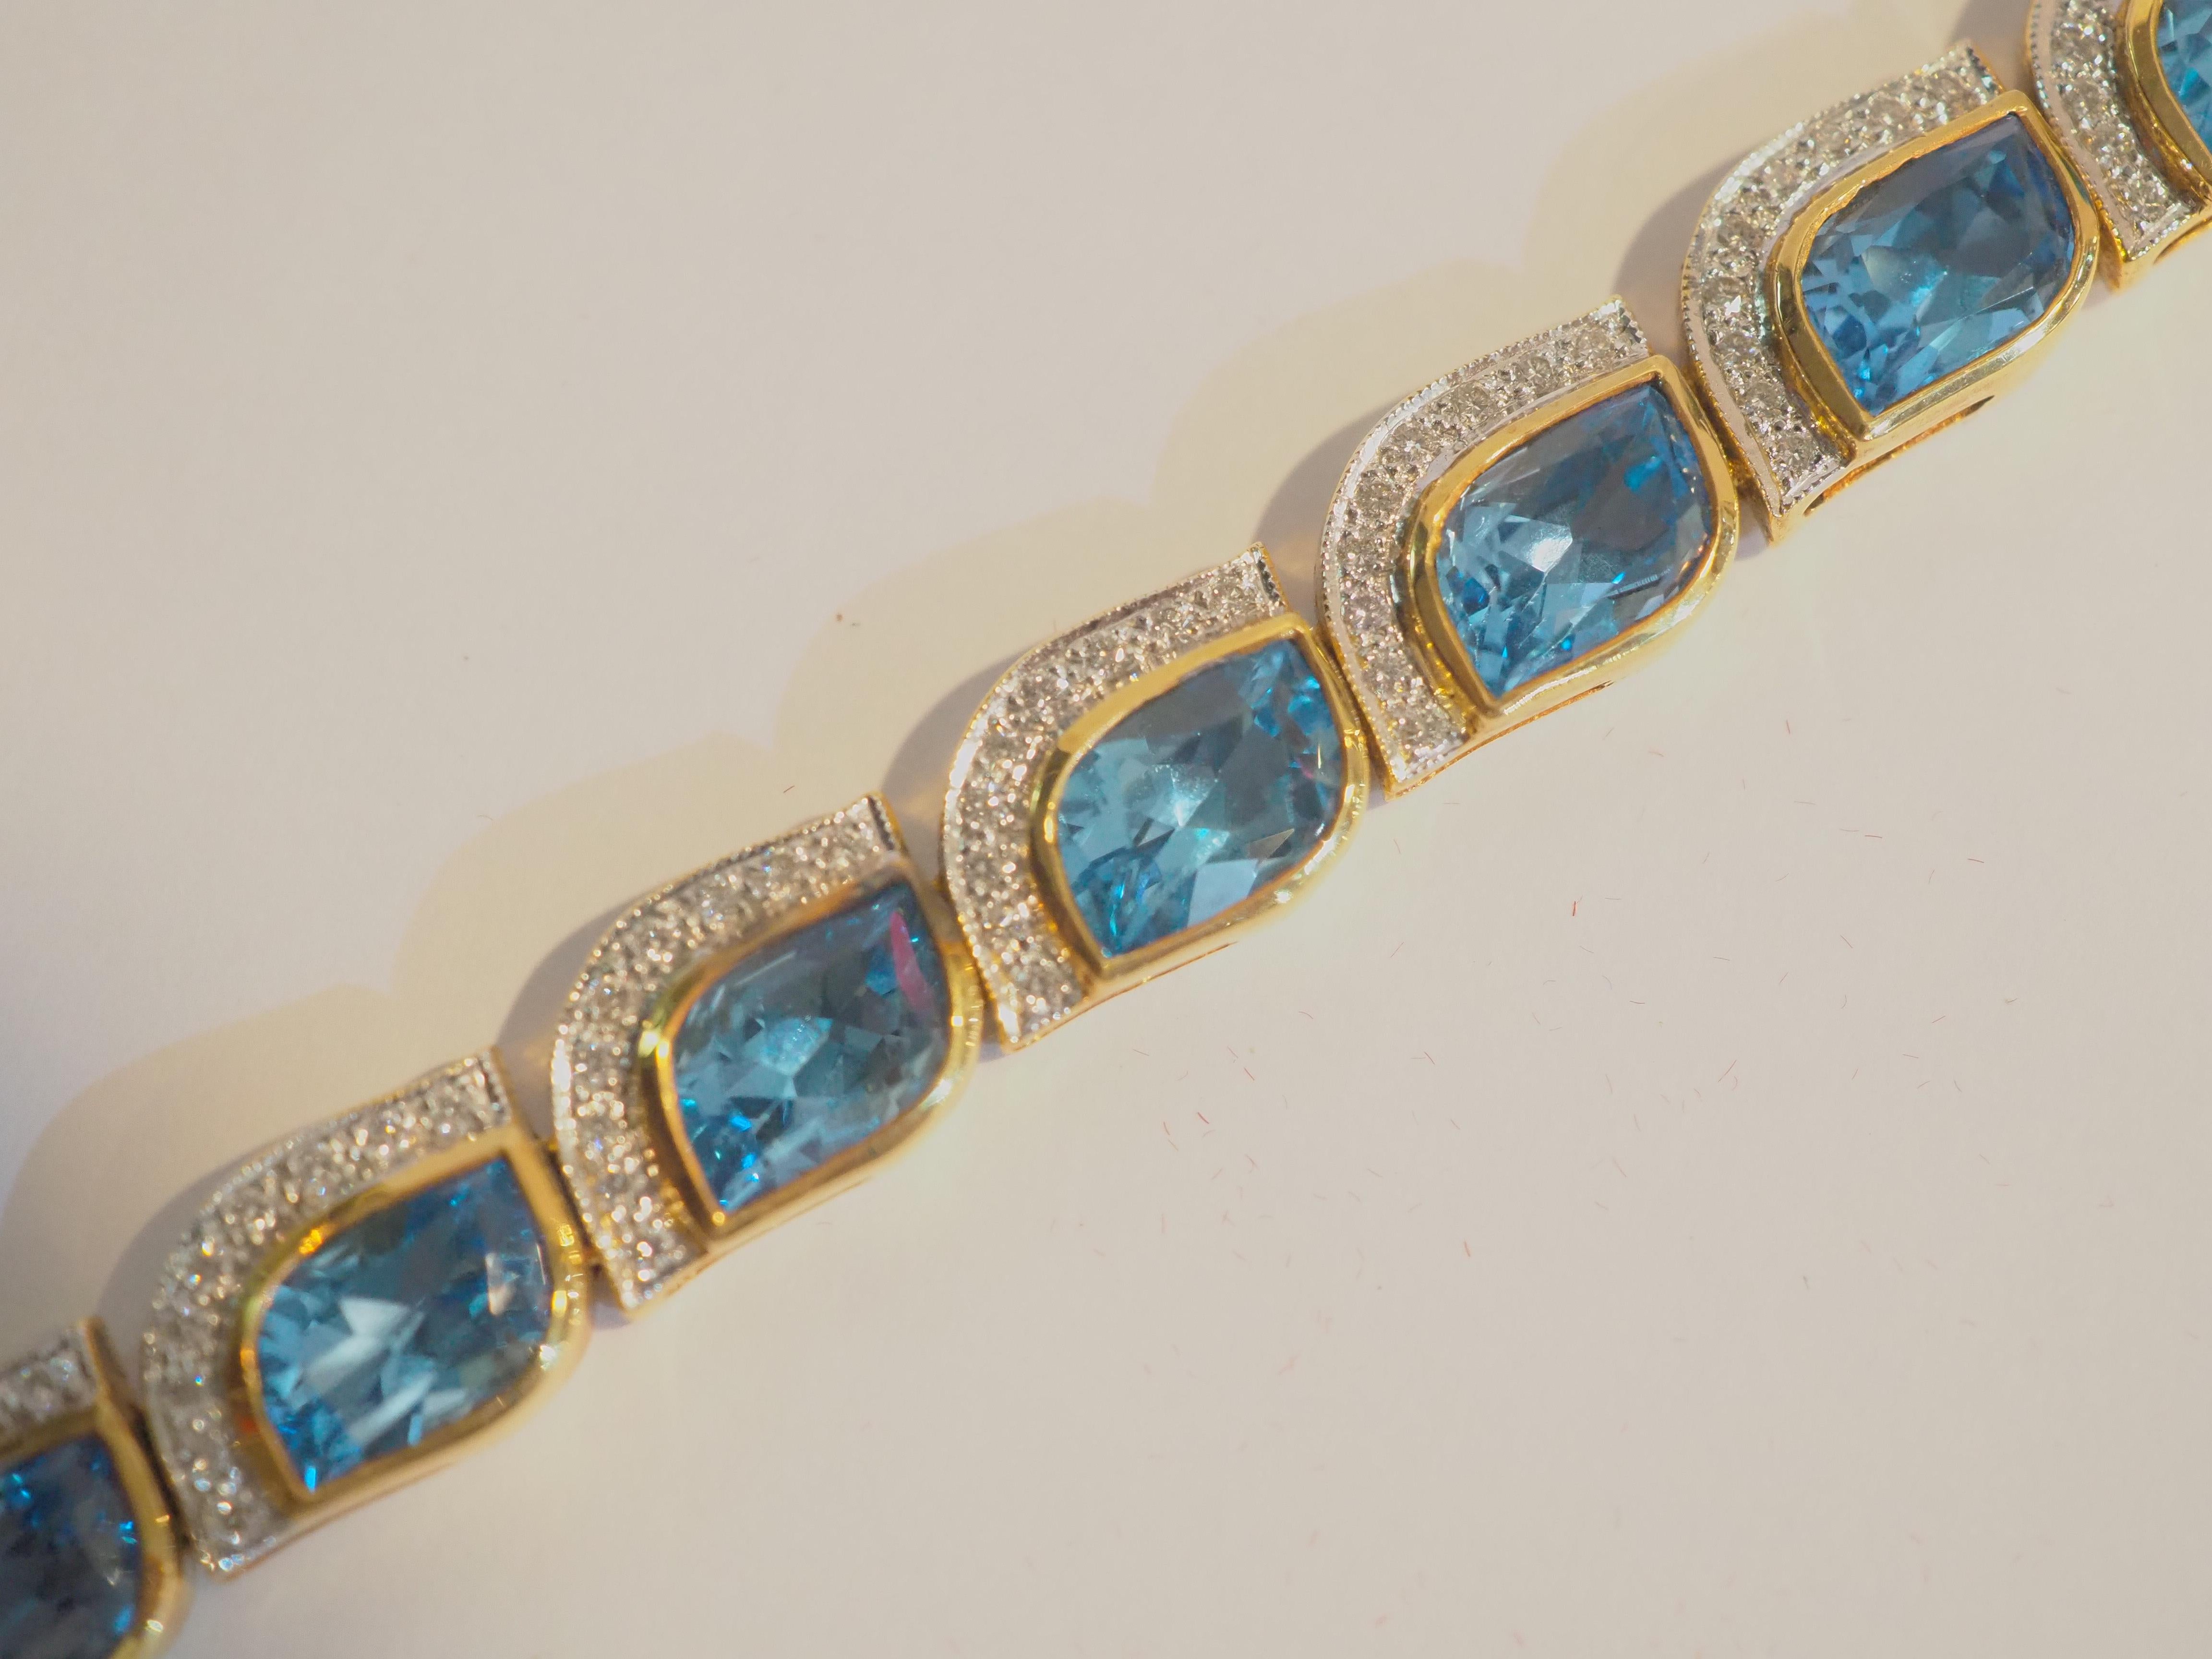 A very beautiful and elegant cocktail bracelet in 18K solid yellow gold with 13 natural mixed cut blue topaz with total weight of 30.16 carats and pave diamonds of total 1.41 carats. A very fine bracelet made with immaculate care. The blue topaz is